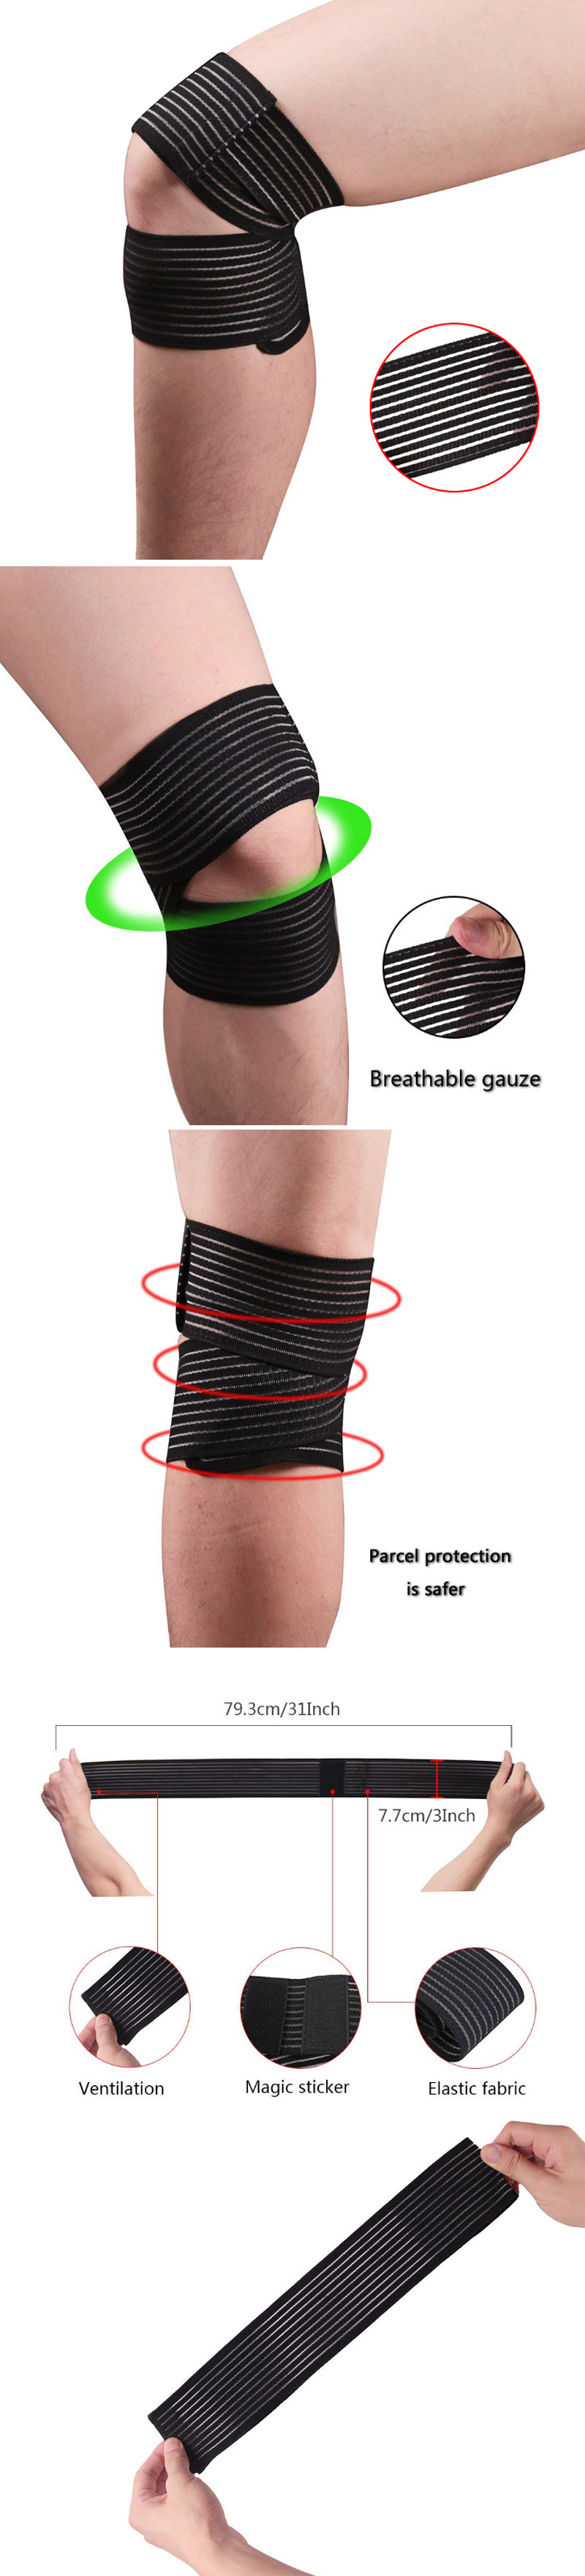 KALOAD-1-PC-Knee-Pad-Polyester-Knee-Support-Elastic-Breathable-Yoga-Sports-Knee-Fitness-Protective-G-1405068-1